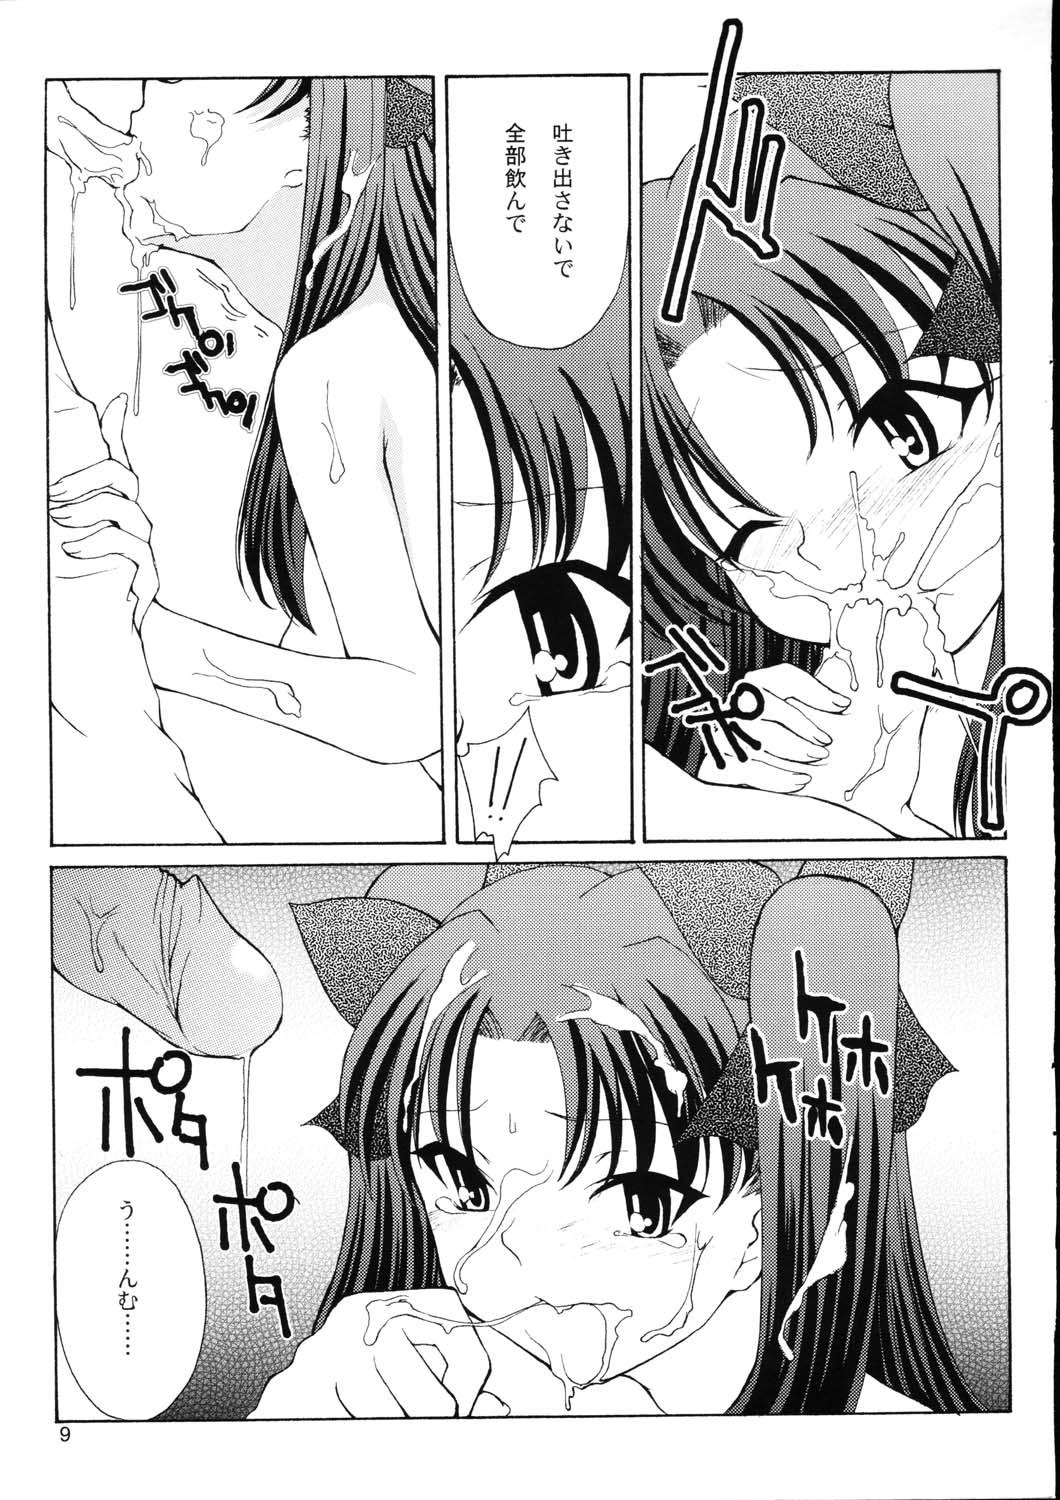 Couple Porn Previous Night - Fate stay night Tugjob - Page 8